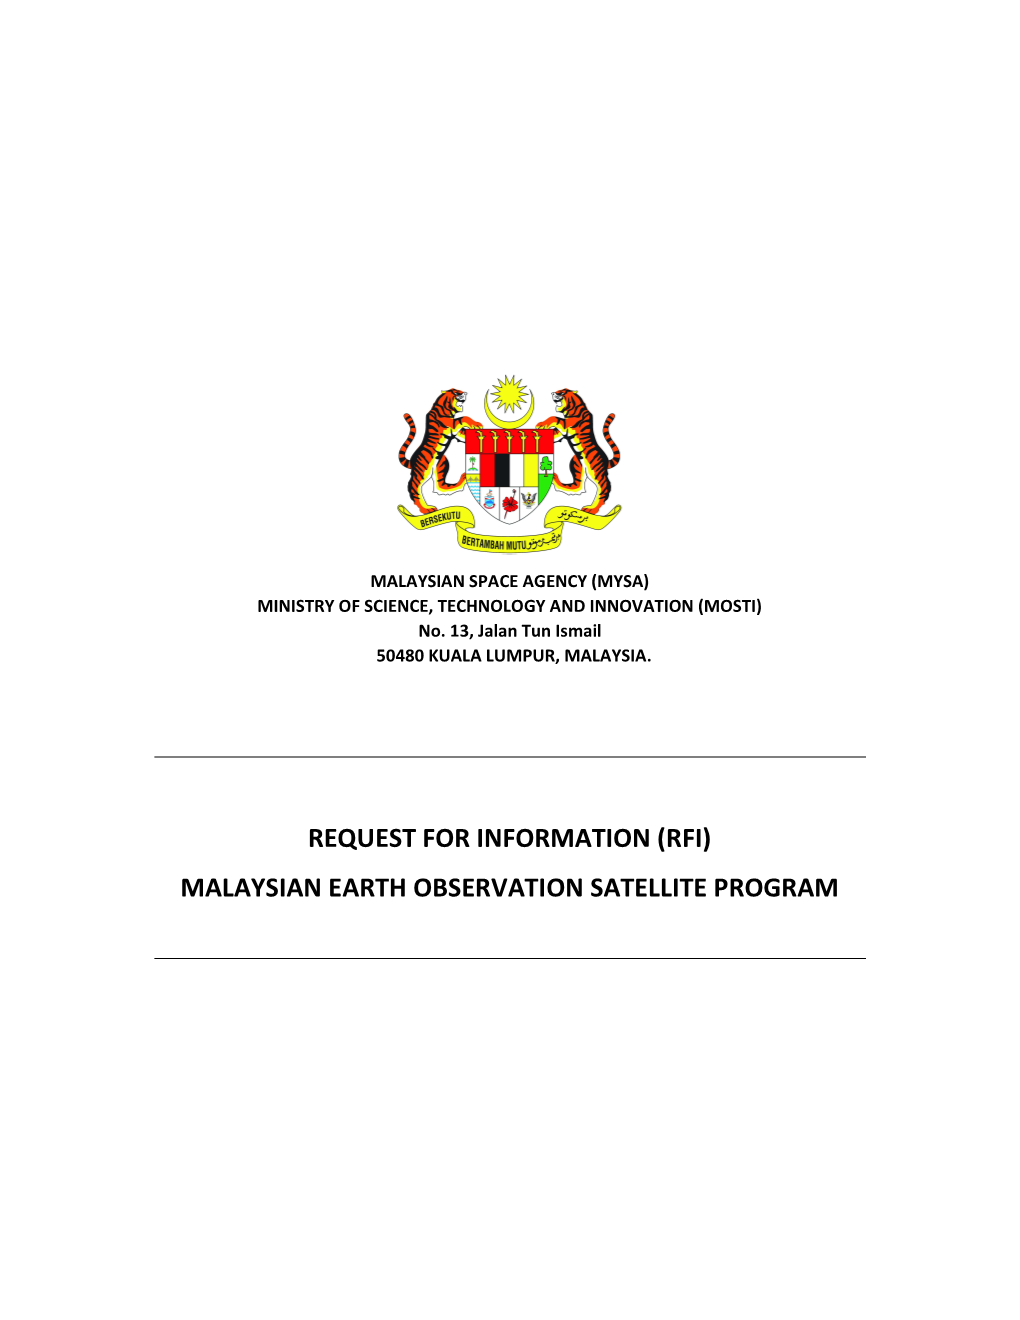 Request for Information (Rfi) Malaysian Earth Observation Satellite Program